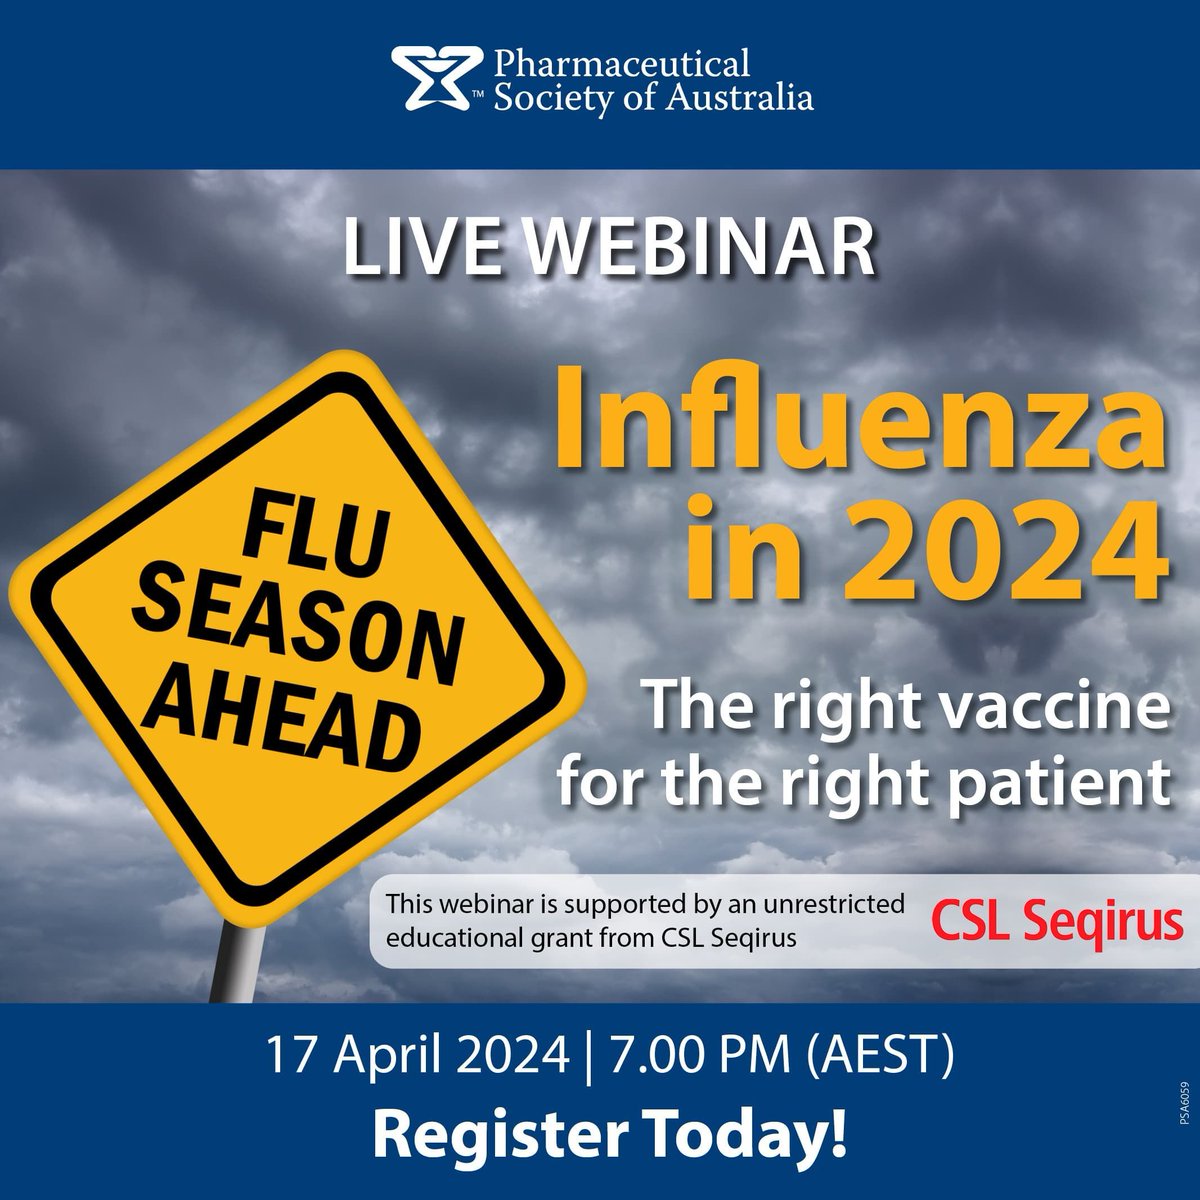 ⏳ Last chance to register – one week to go! Join us on 17 April, 7:00pm AEST for a live webinar and discover practical strategies to identify vulnerable groups and reduce the risk of flu-related complications. Register now to secure your spot! 👉 buff.ly/4cfDJrg